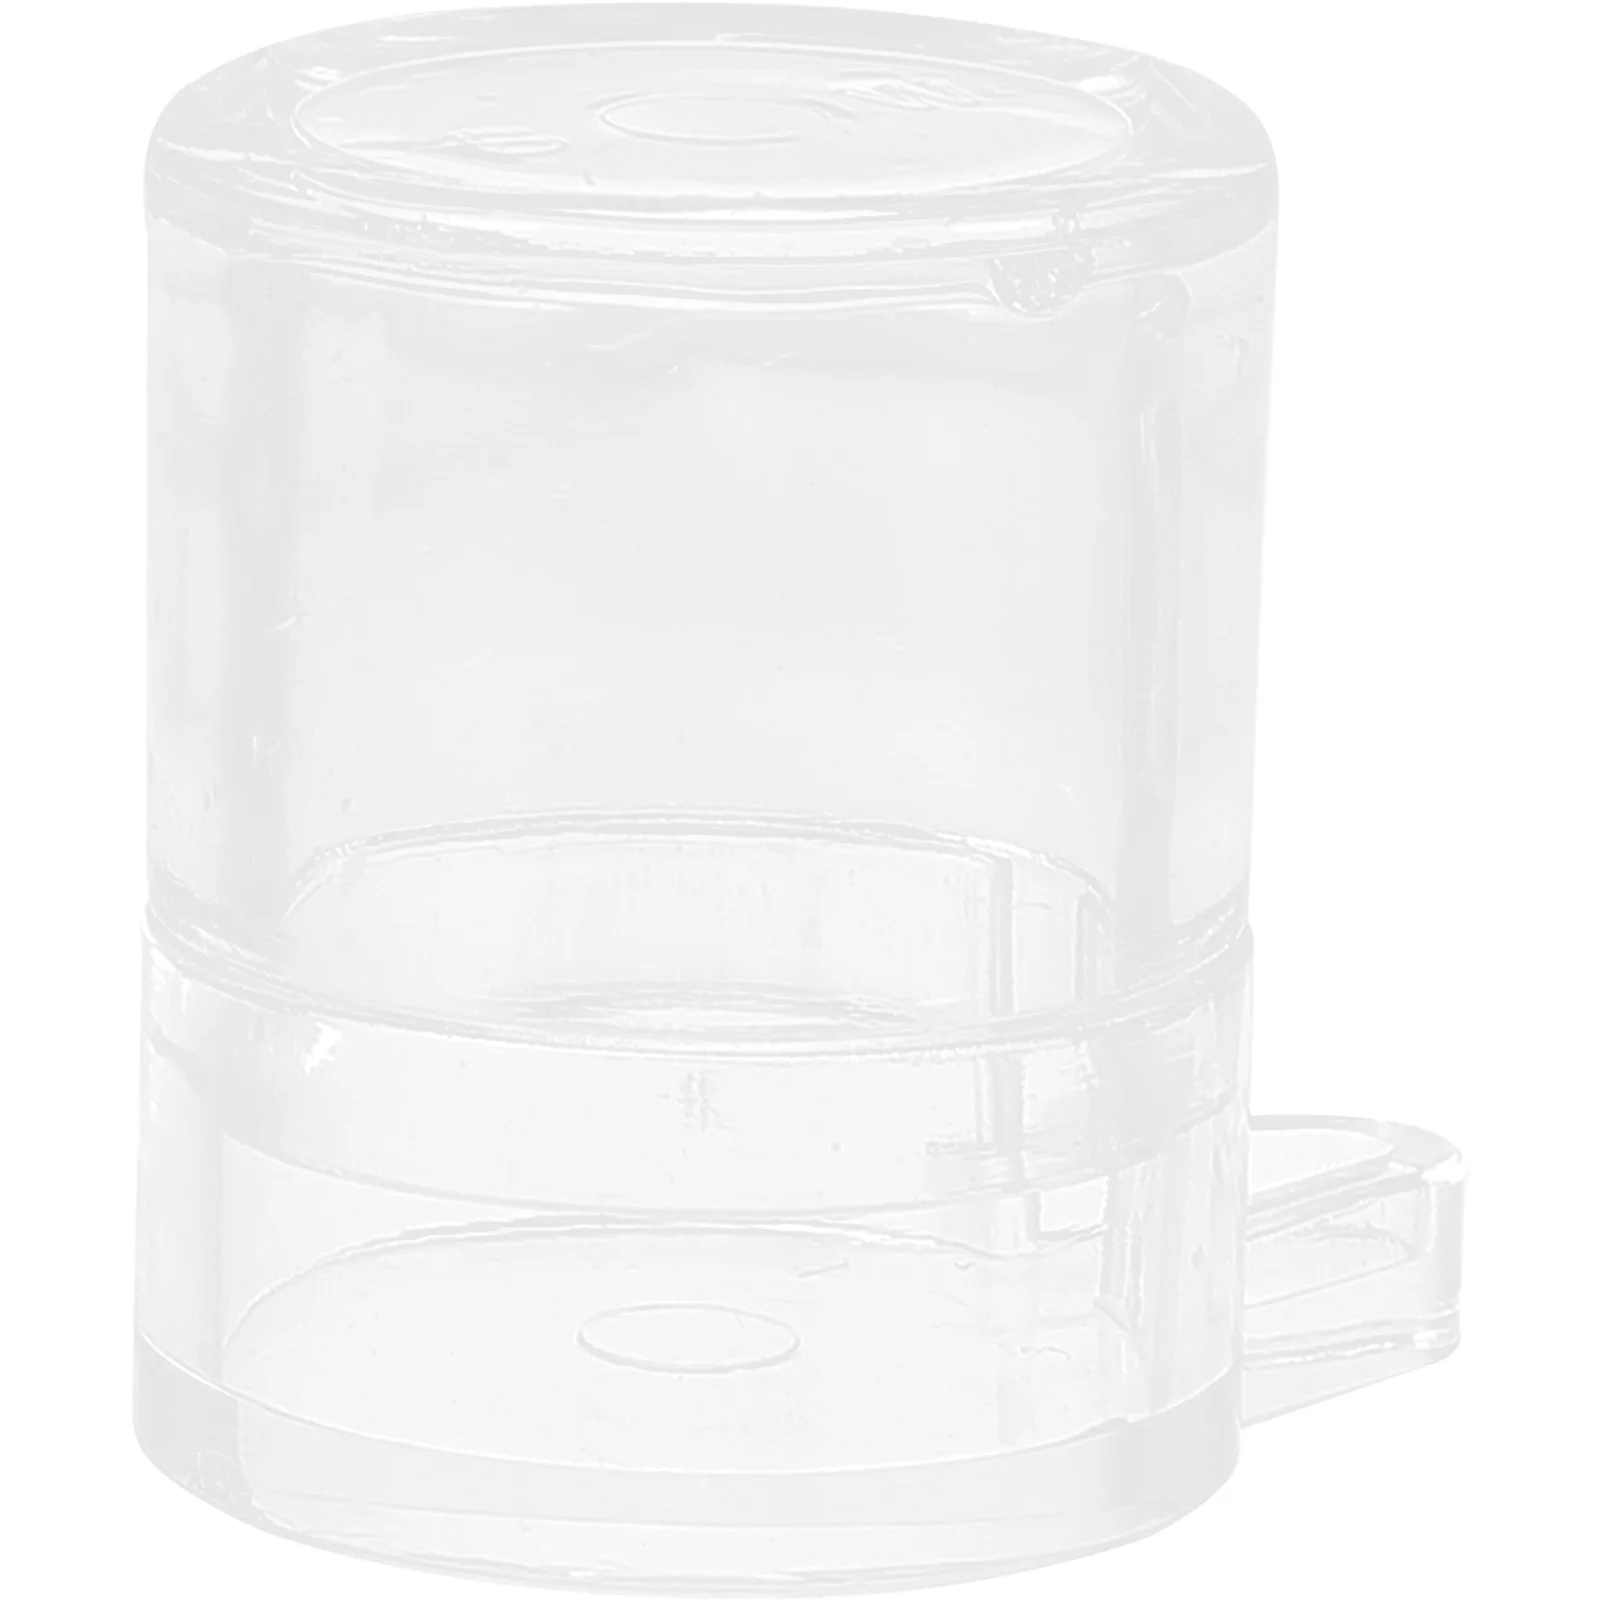 

Pet Water Feeder Clear Ants Farm Stuff Visible Feeding Container Formicarium Insect Nest Items Small Bowl Area